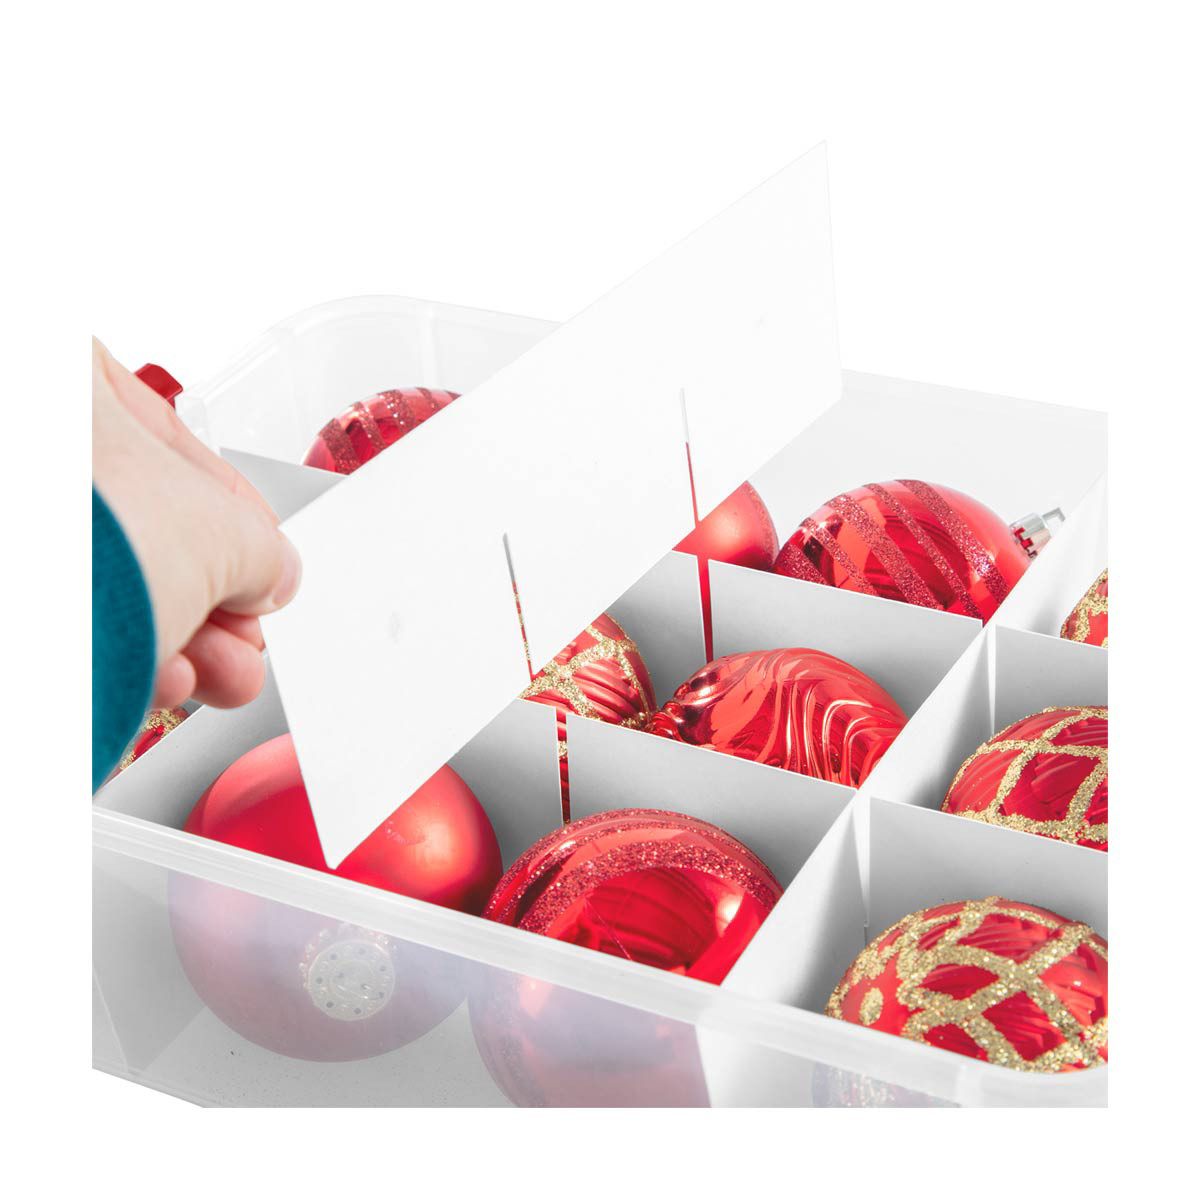 Stack & Carry Red 2 Layer Ornament Box by Sterilite at Fleet Farm